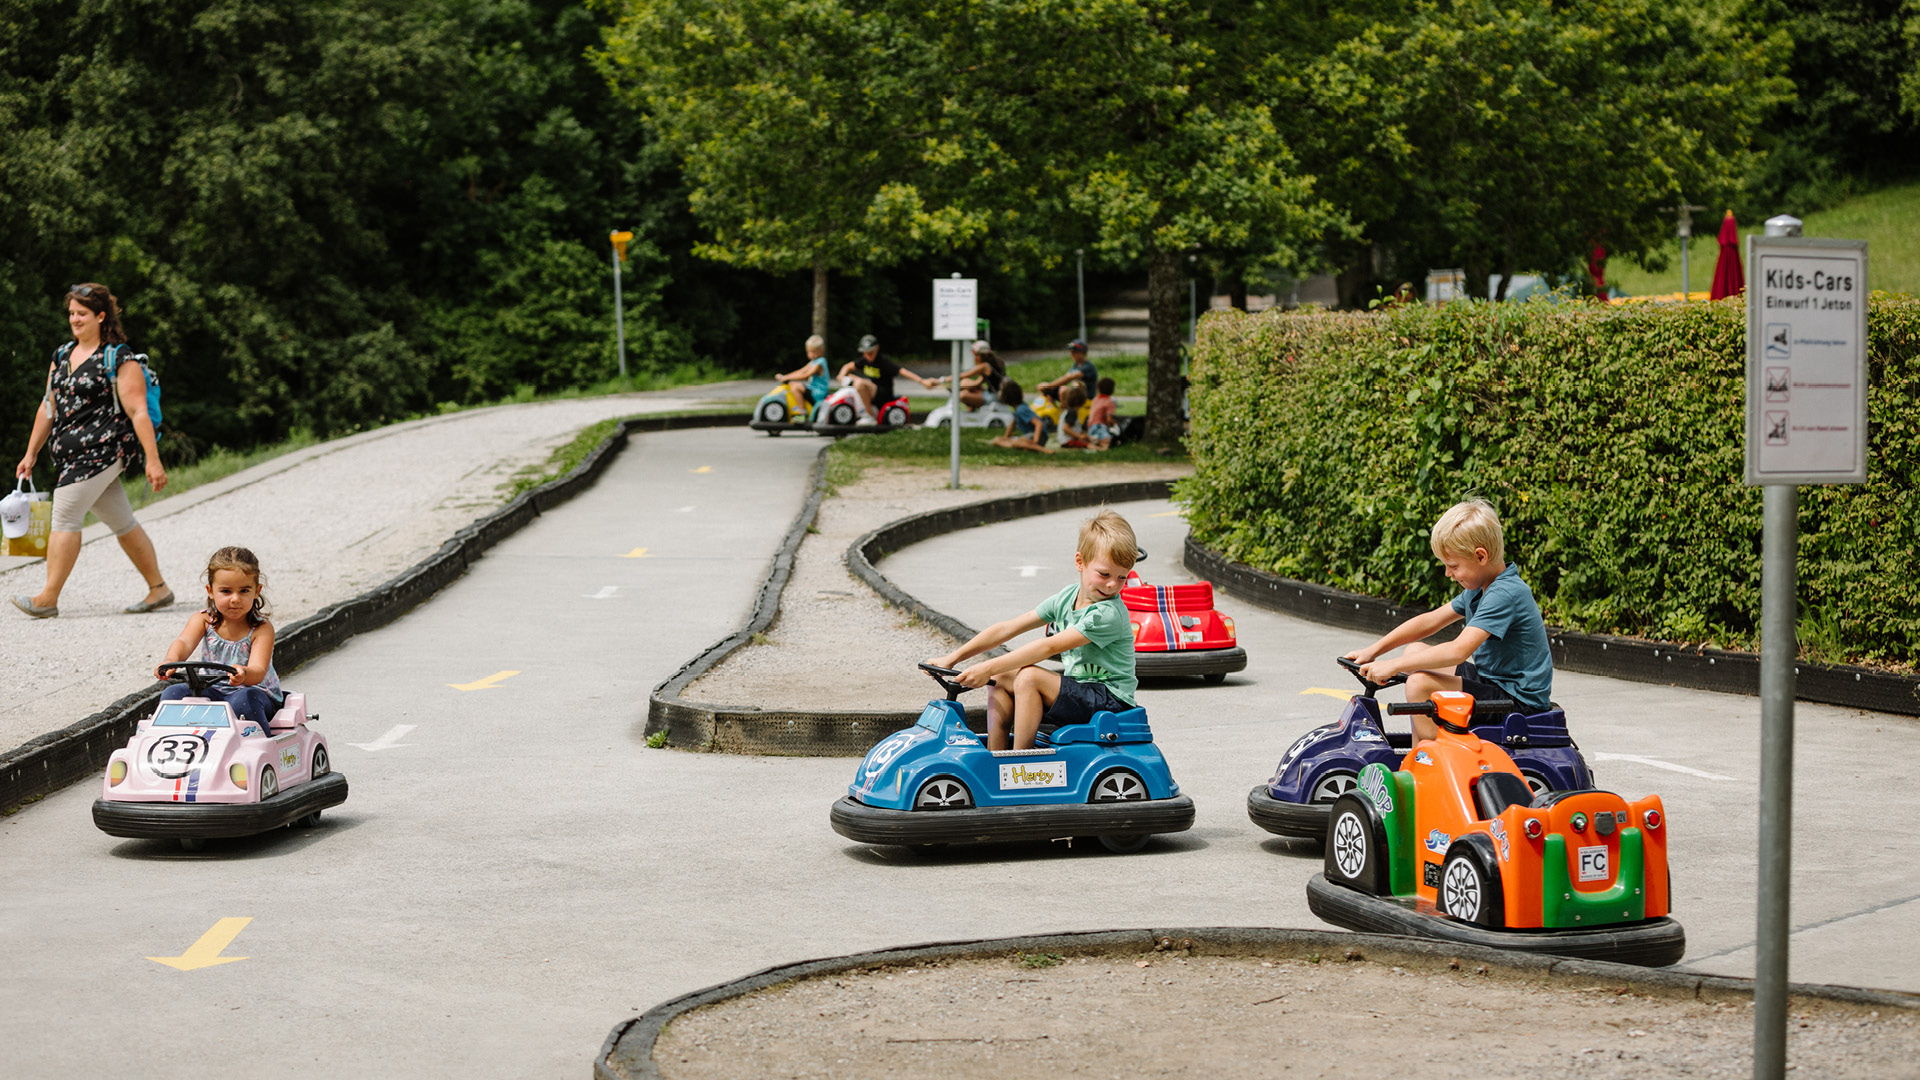 Three young children racing in miniature cars